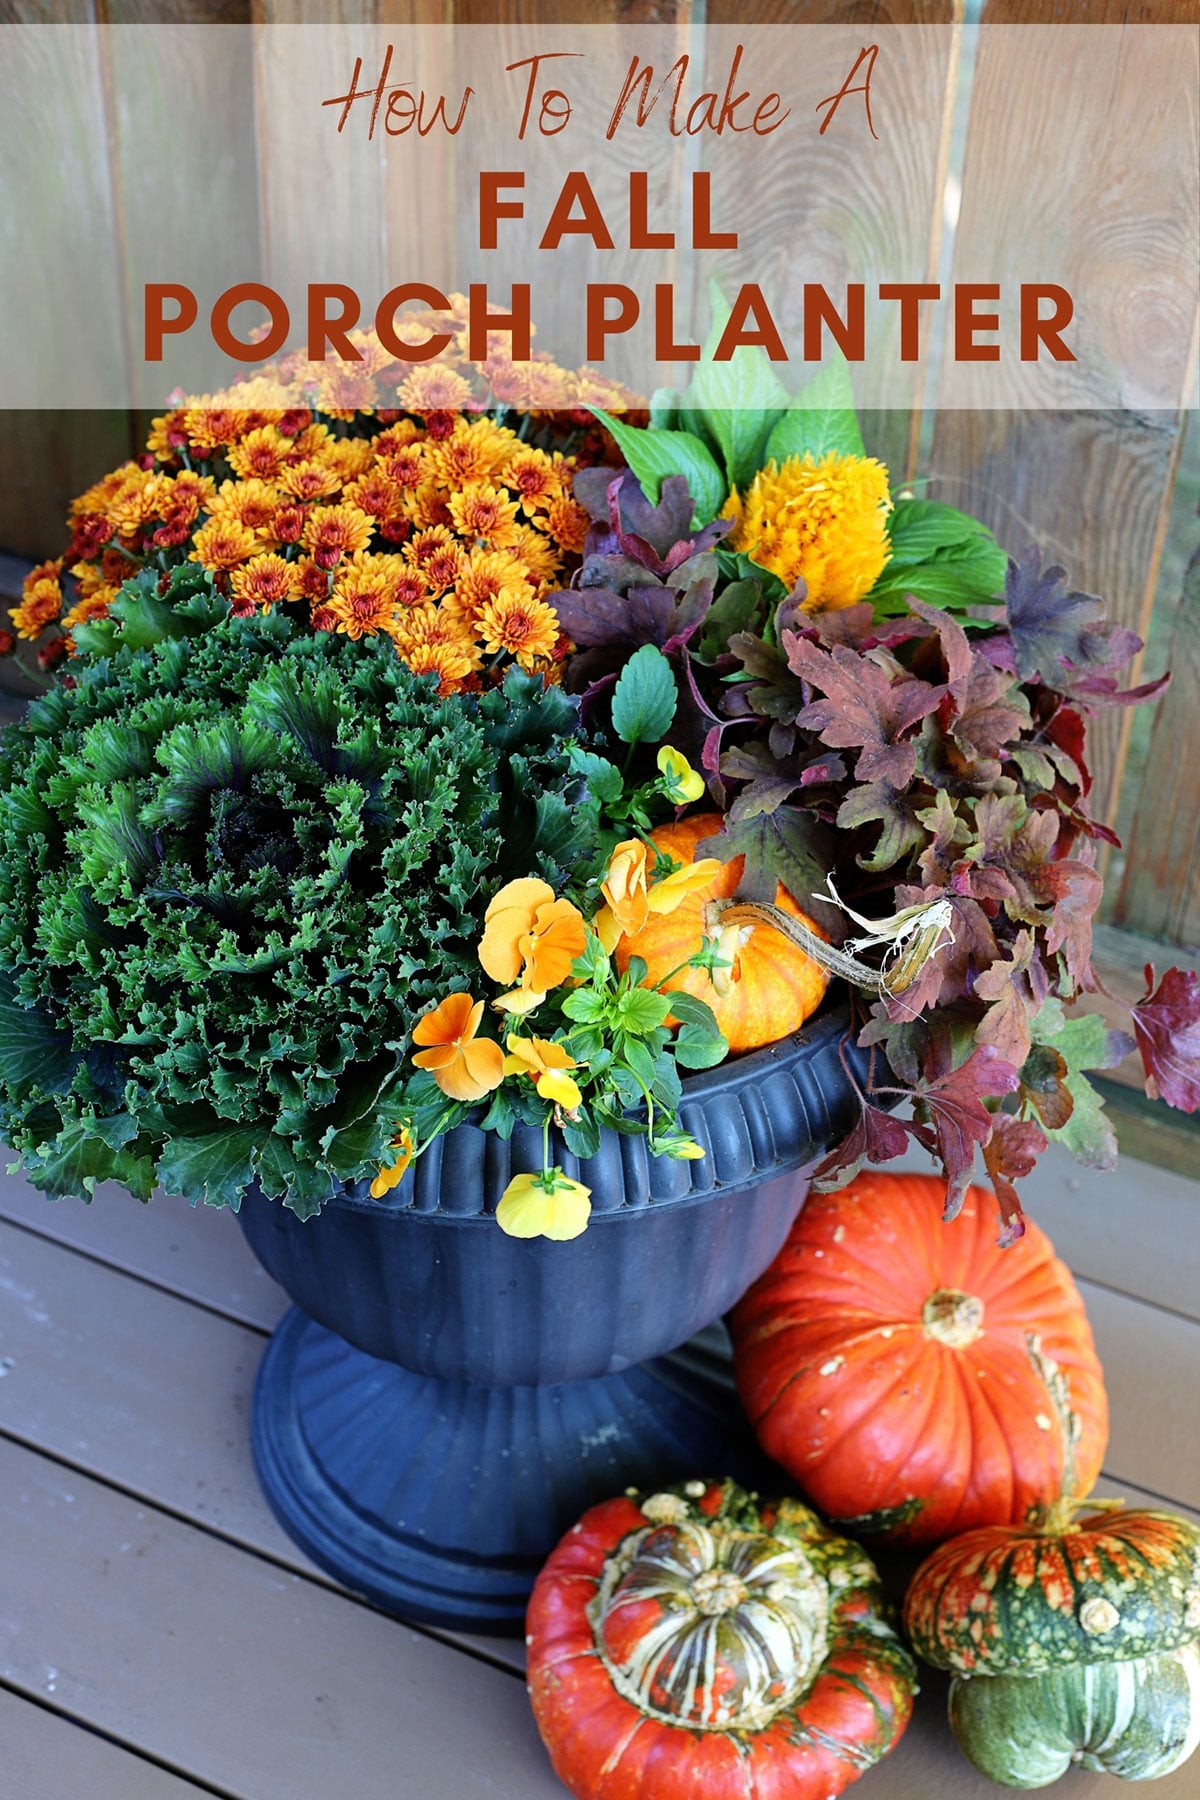 Fall porch planter surrounded by gourds.